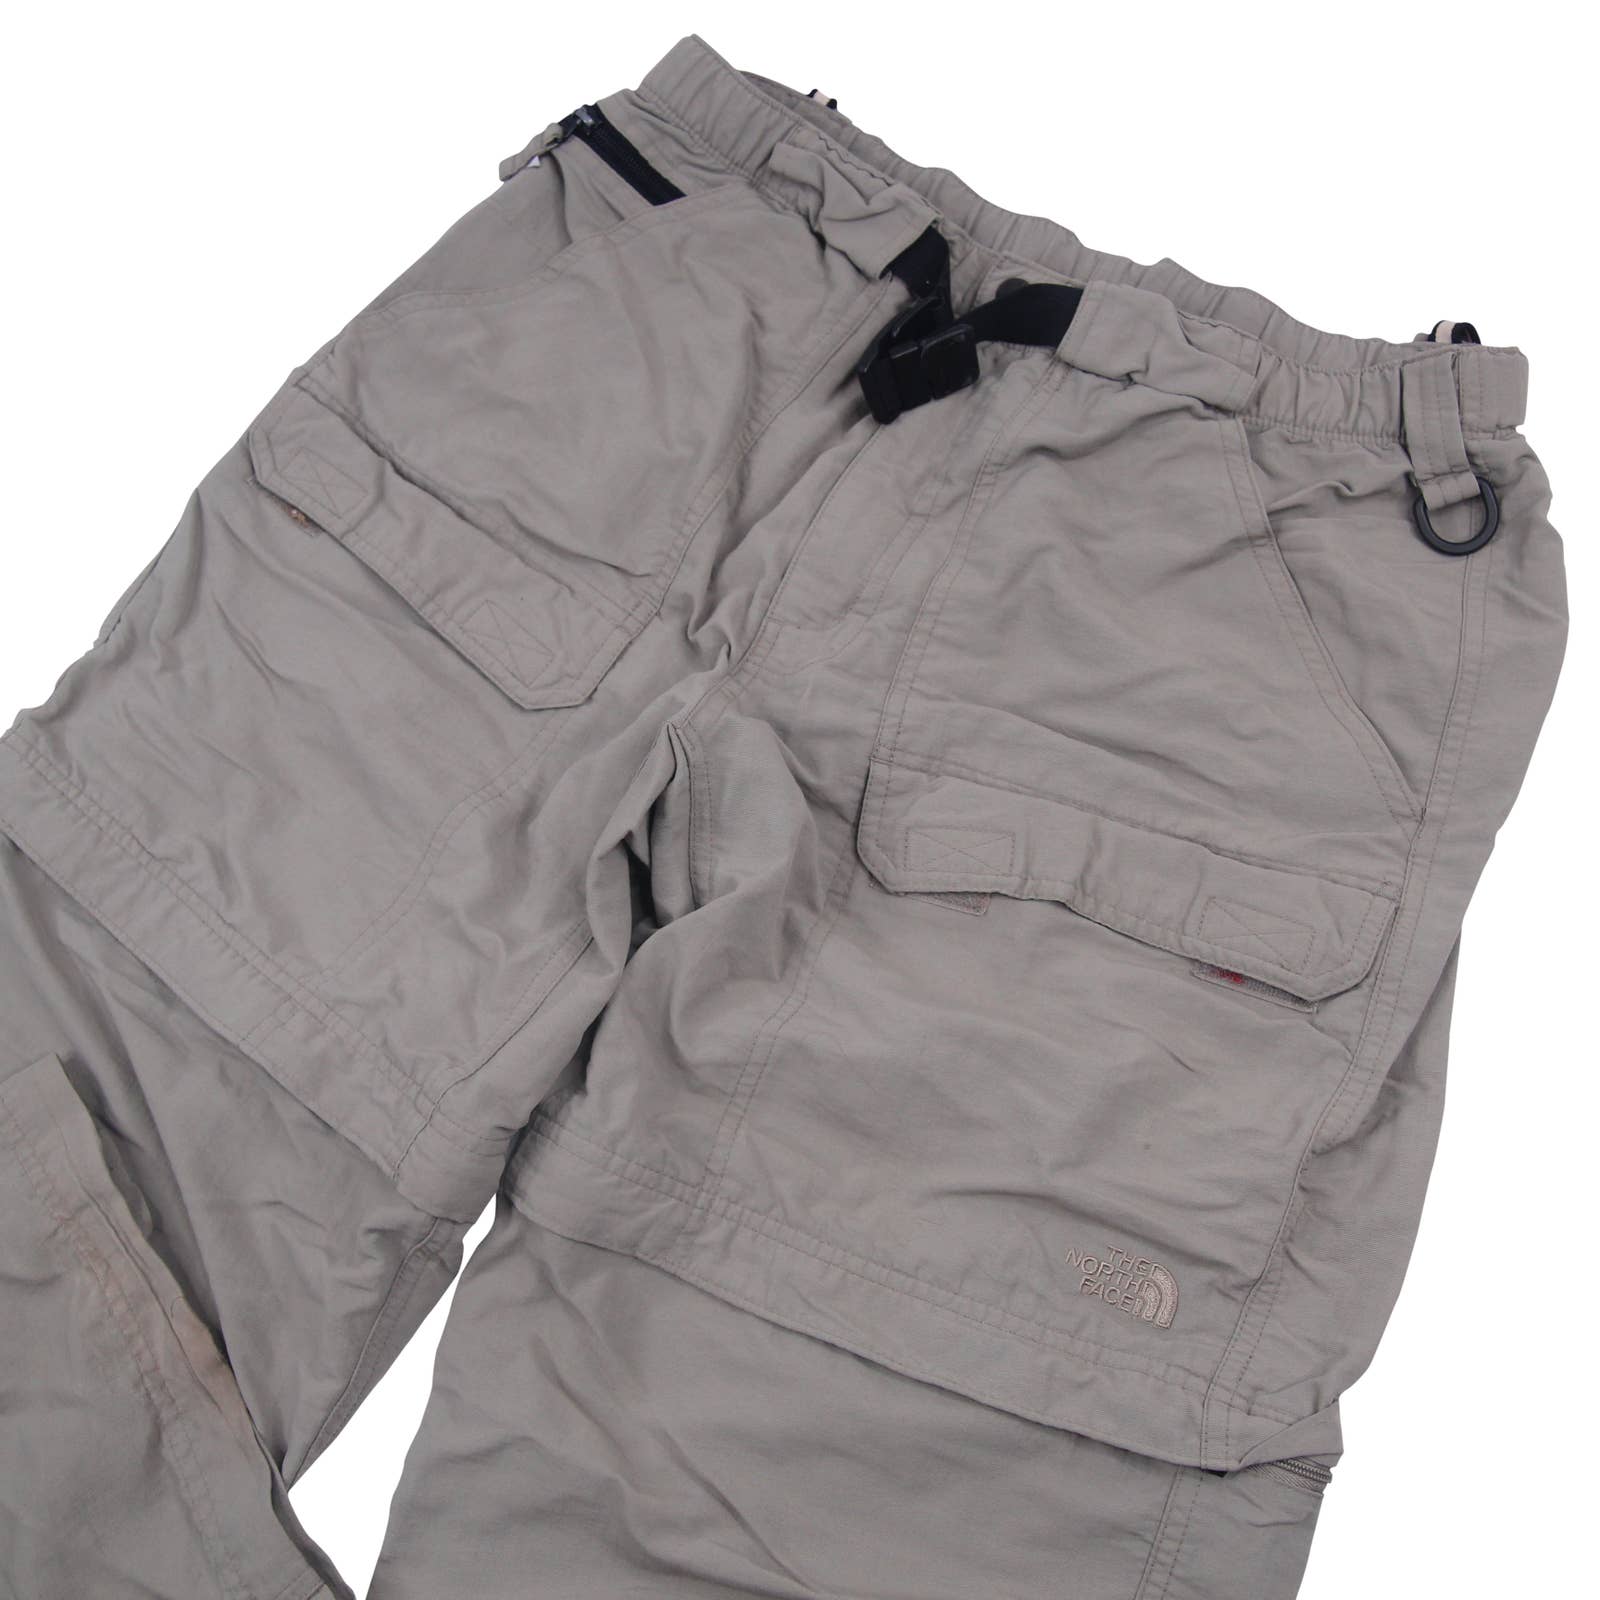 THE NORTH FACE Hiking pants in black/ gray